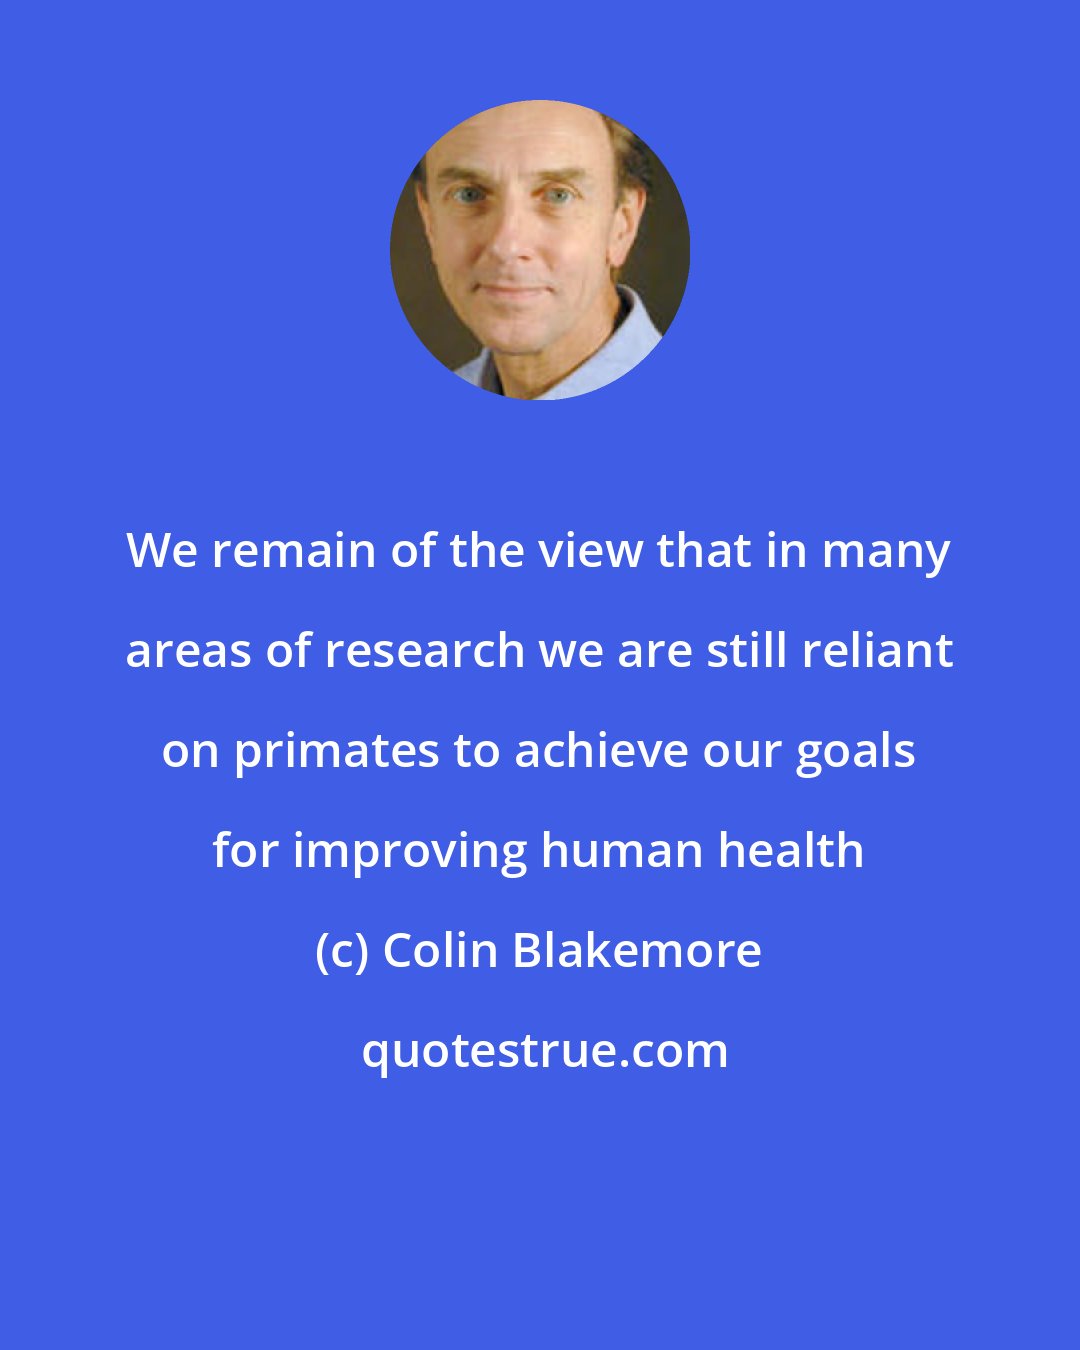 Colin Blakemore: We remain of the view that in many areas of research we are still reliant on primates to achieve our goals for improving human health